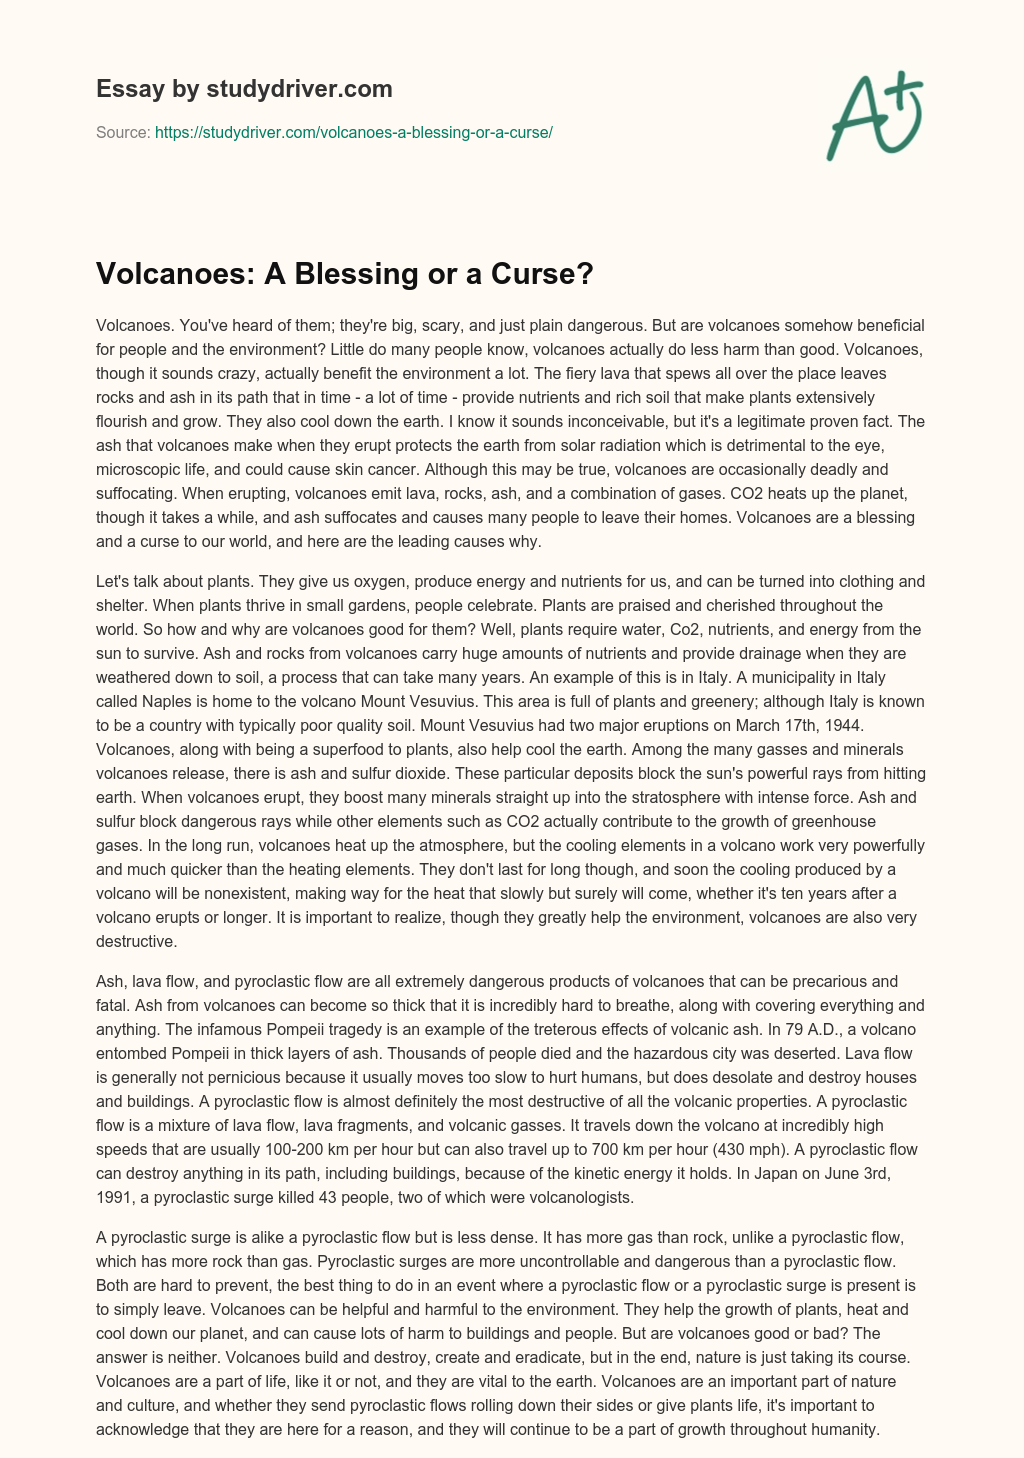 Volcanoes: a Blessing or a Curse? essay